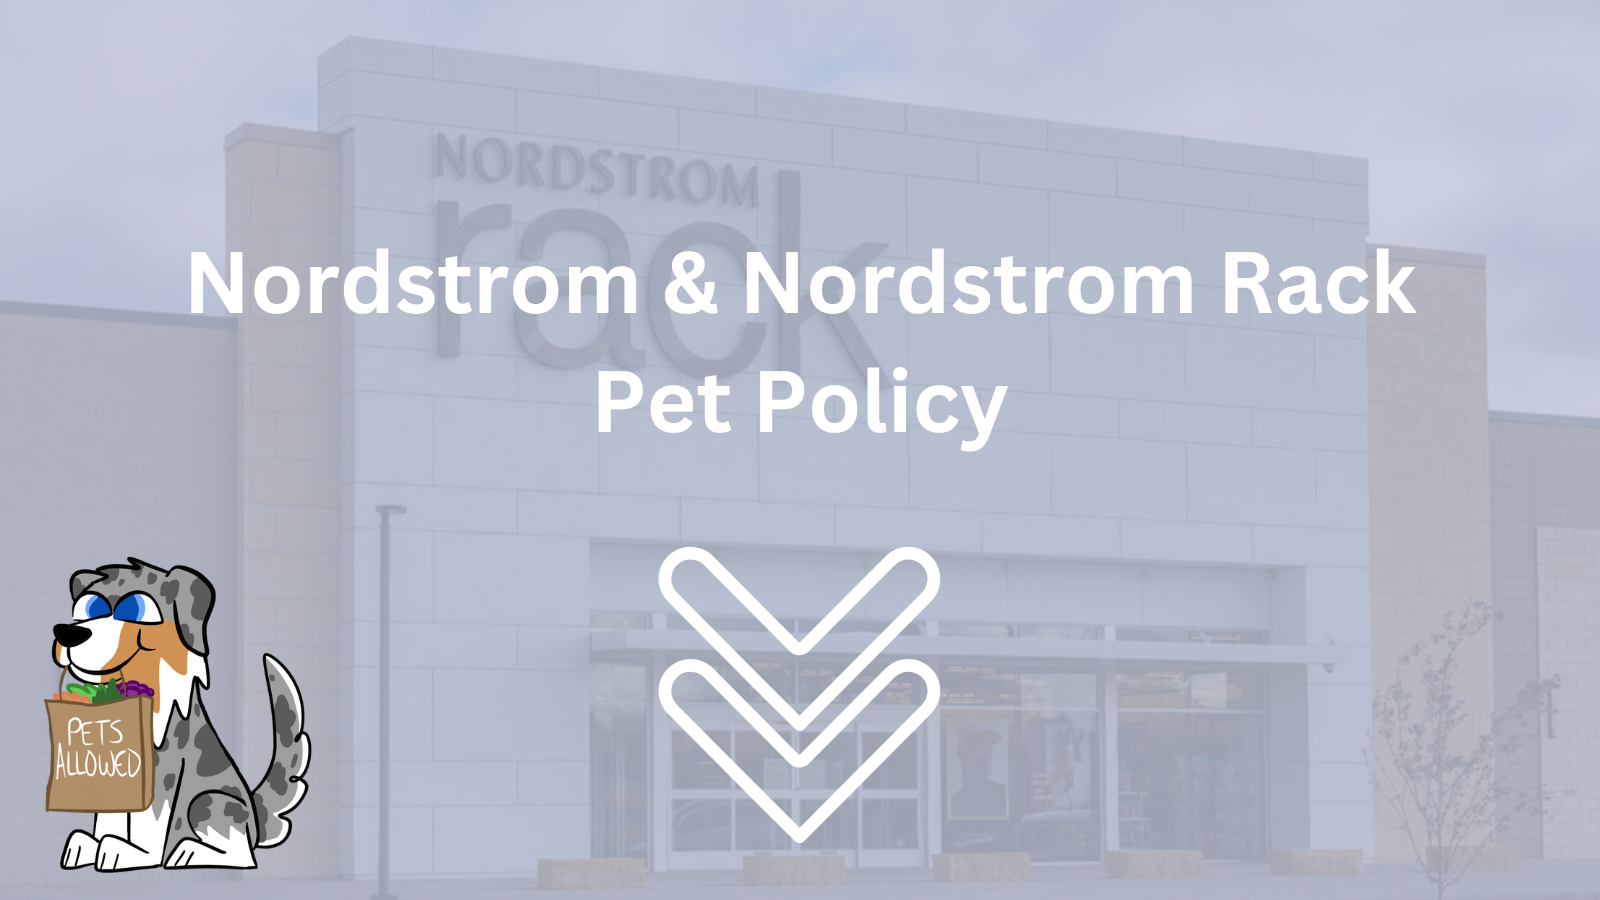 Image Text: "Nordstrom & Nordstrom Rack Pet Policy"